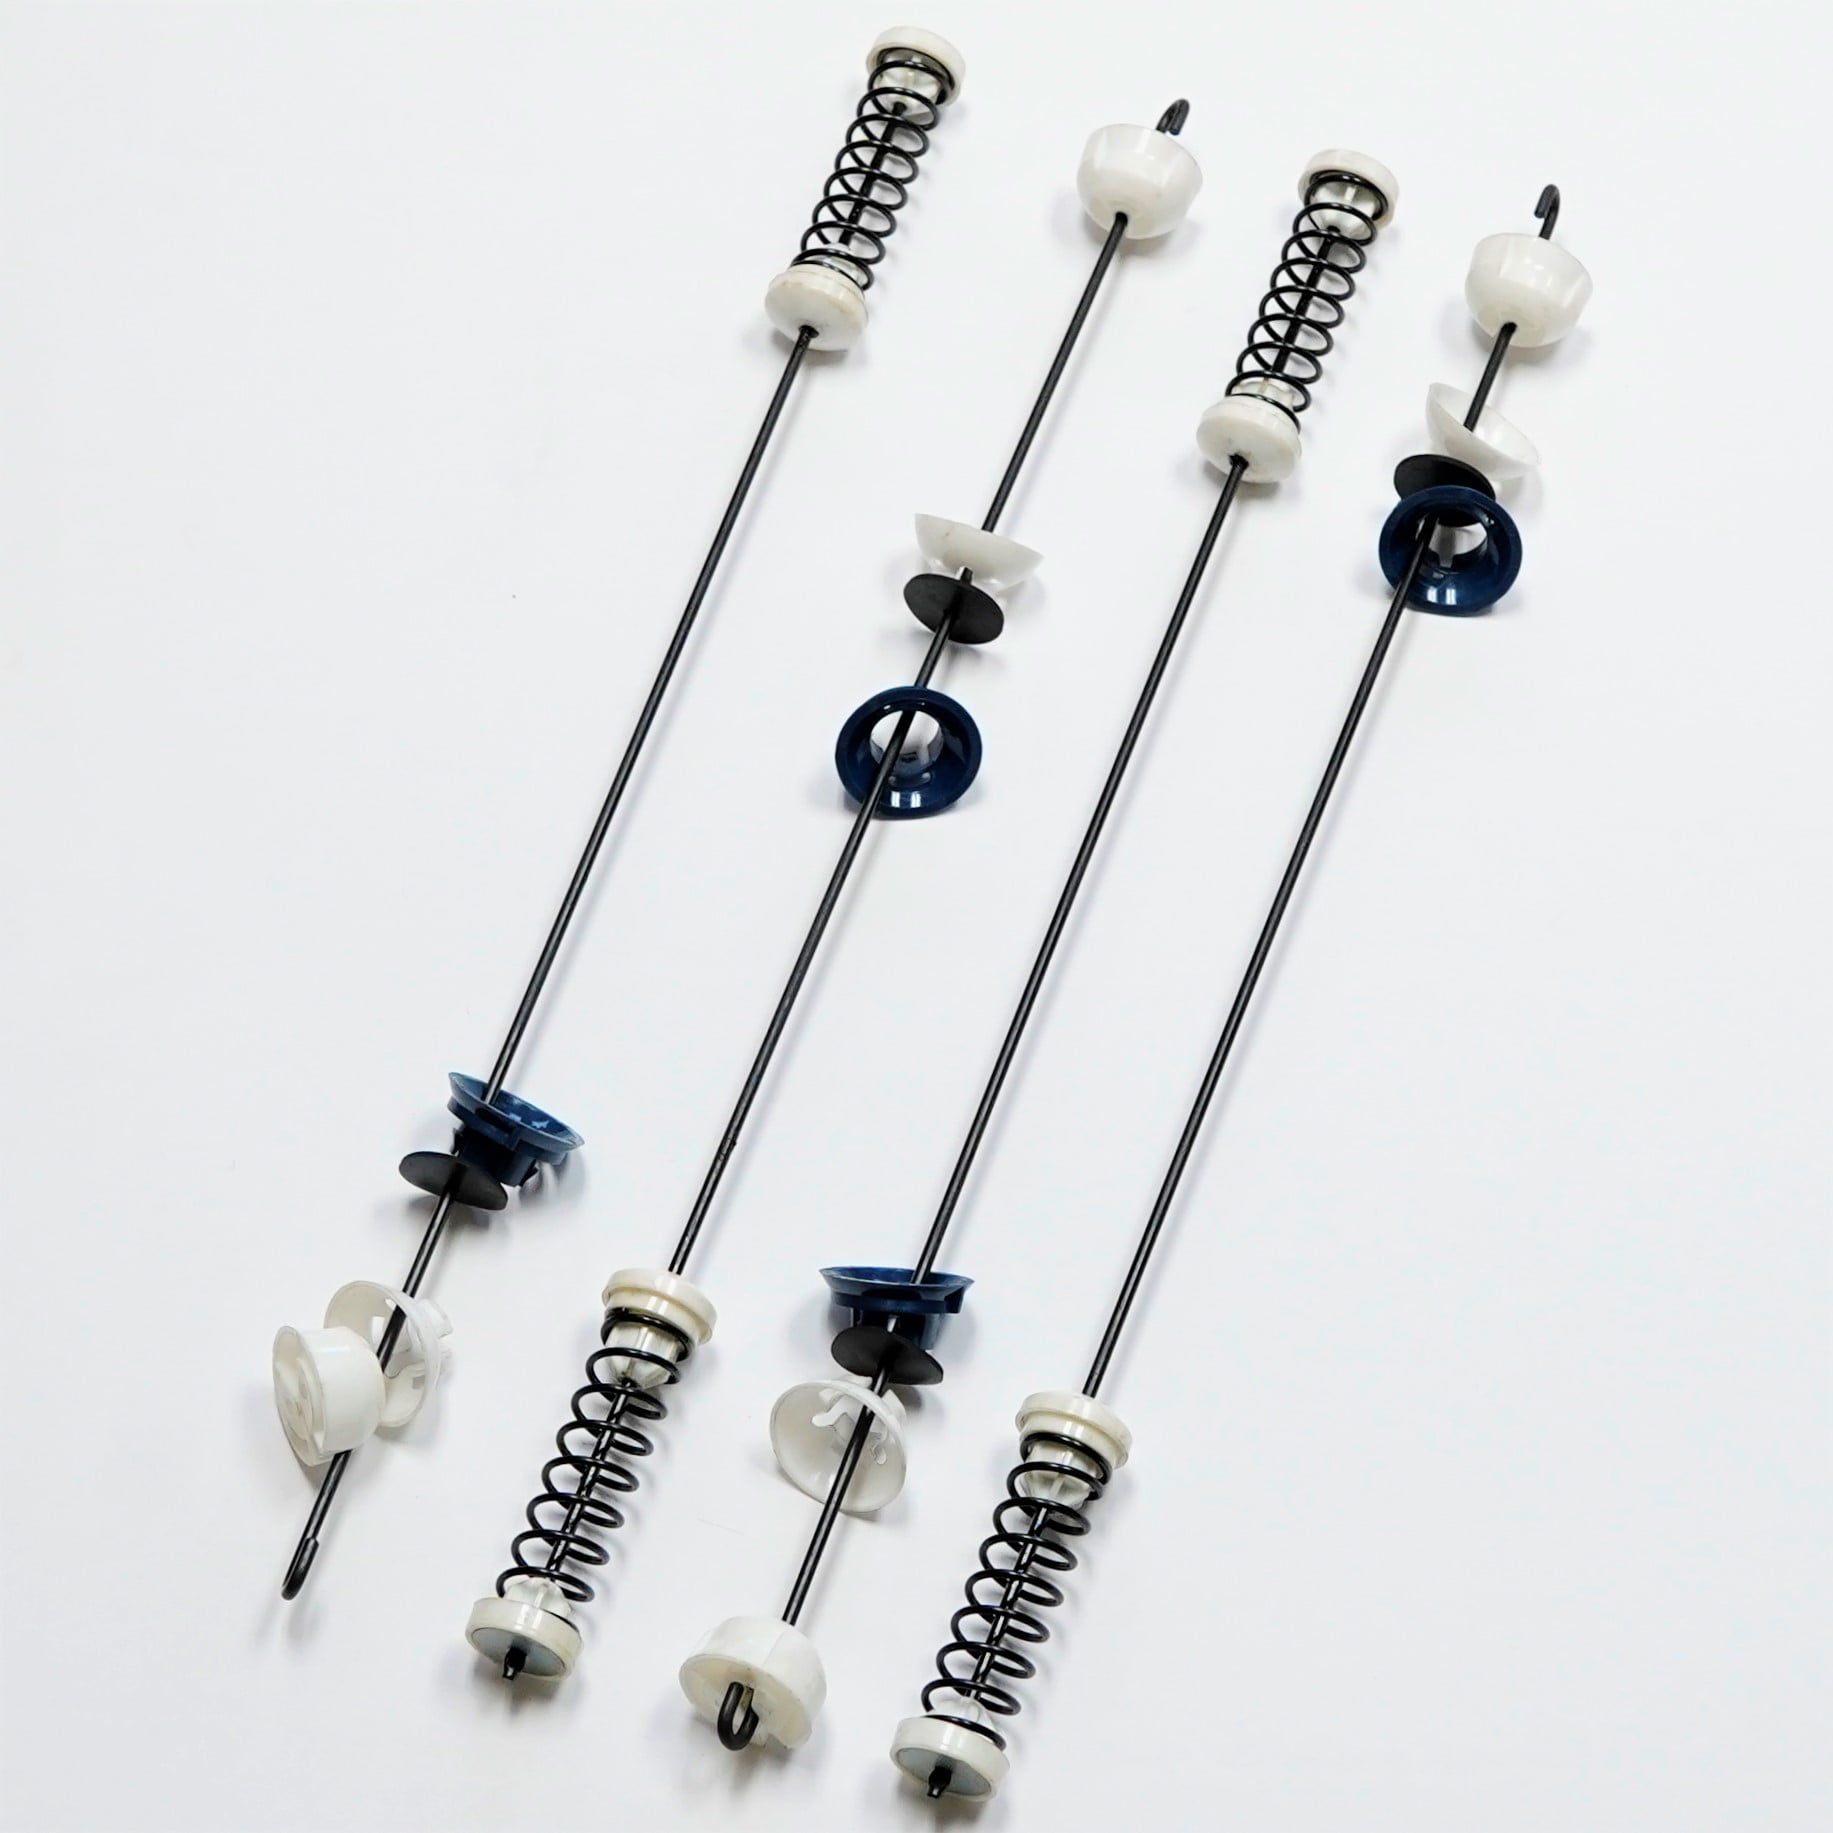 Details about   4Pack W10780048 Washer Suspension Rod &W10400895 Suspension Spring Fit Whirlpool 